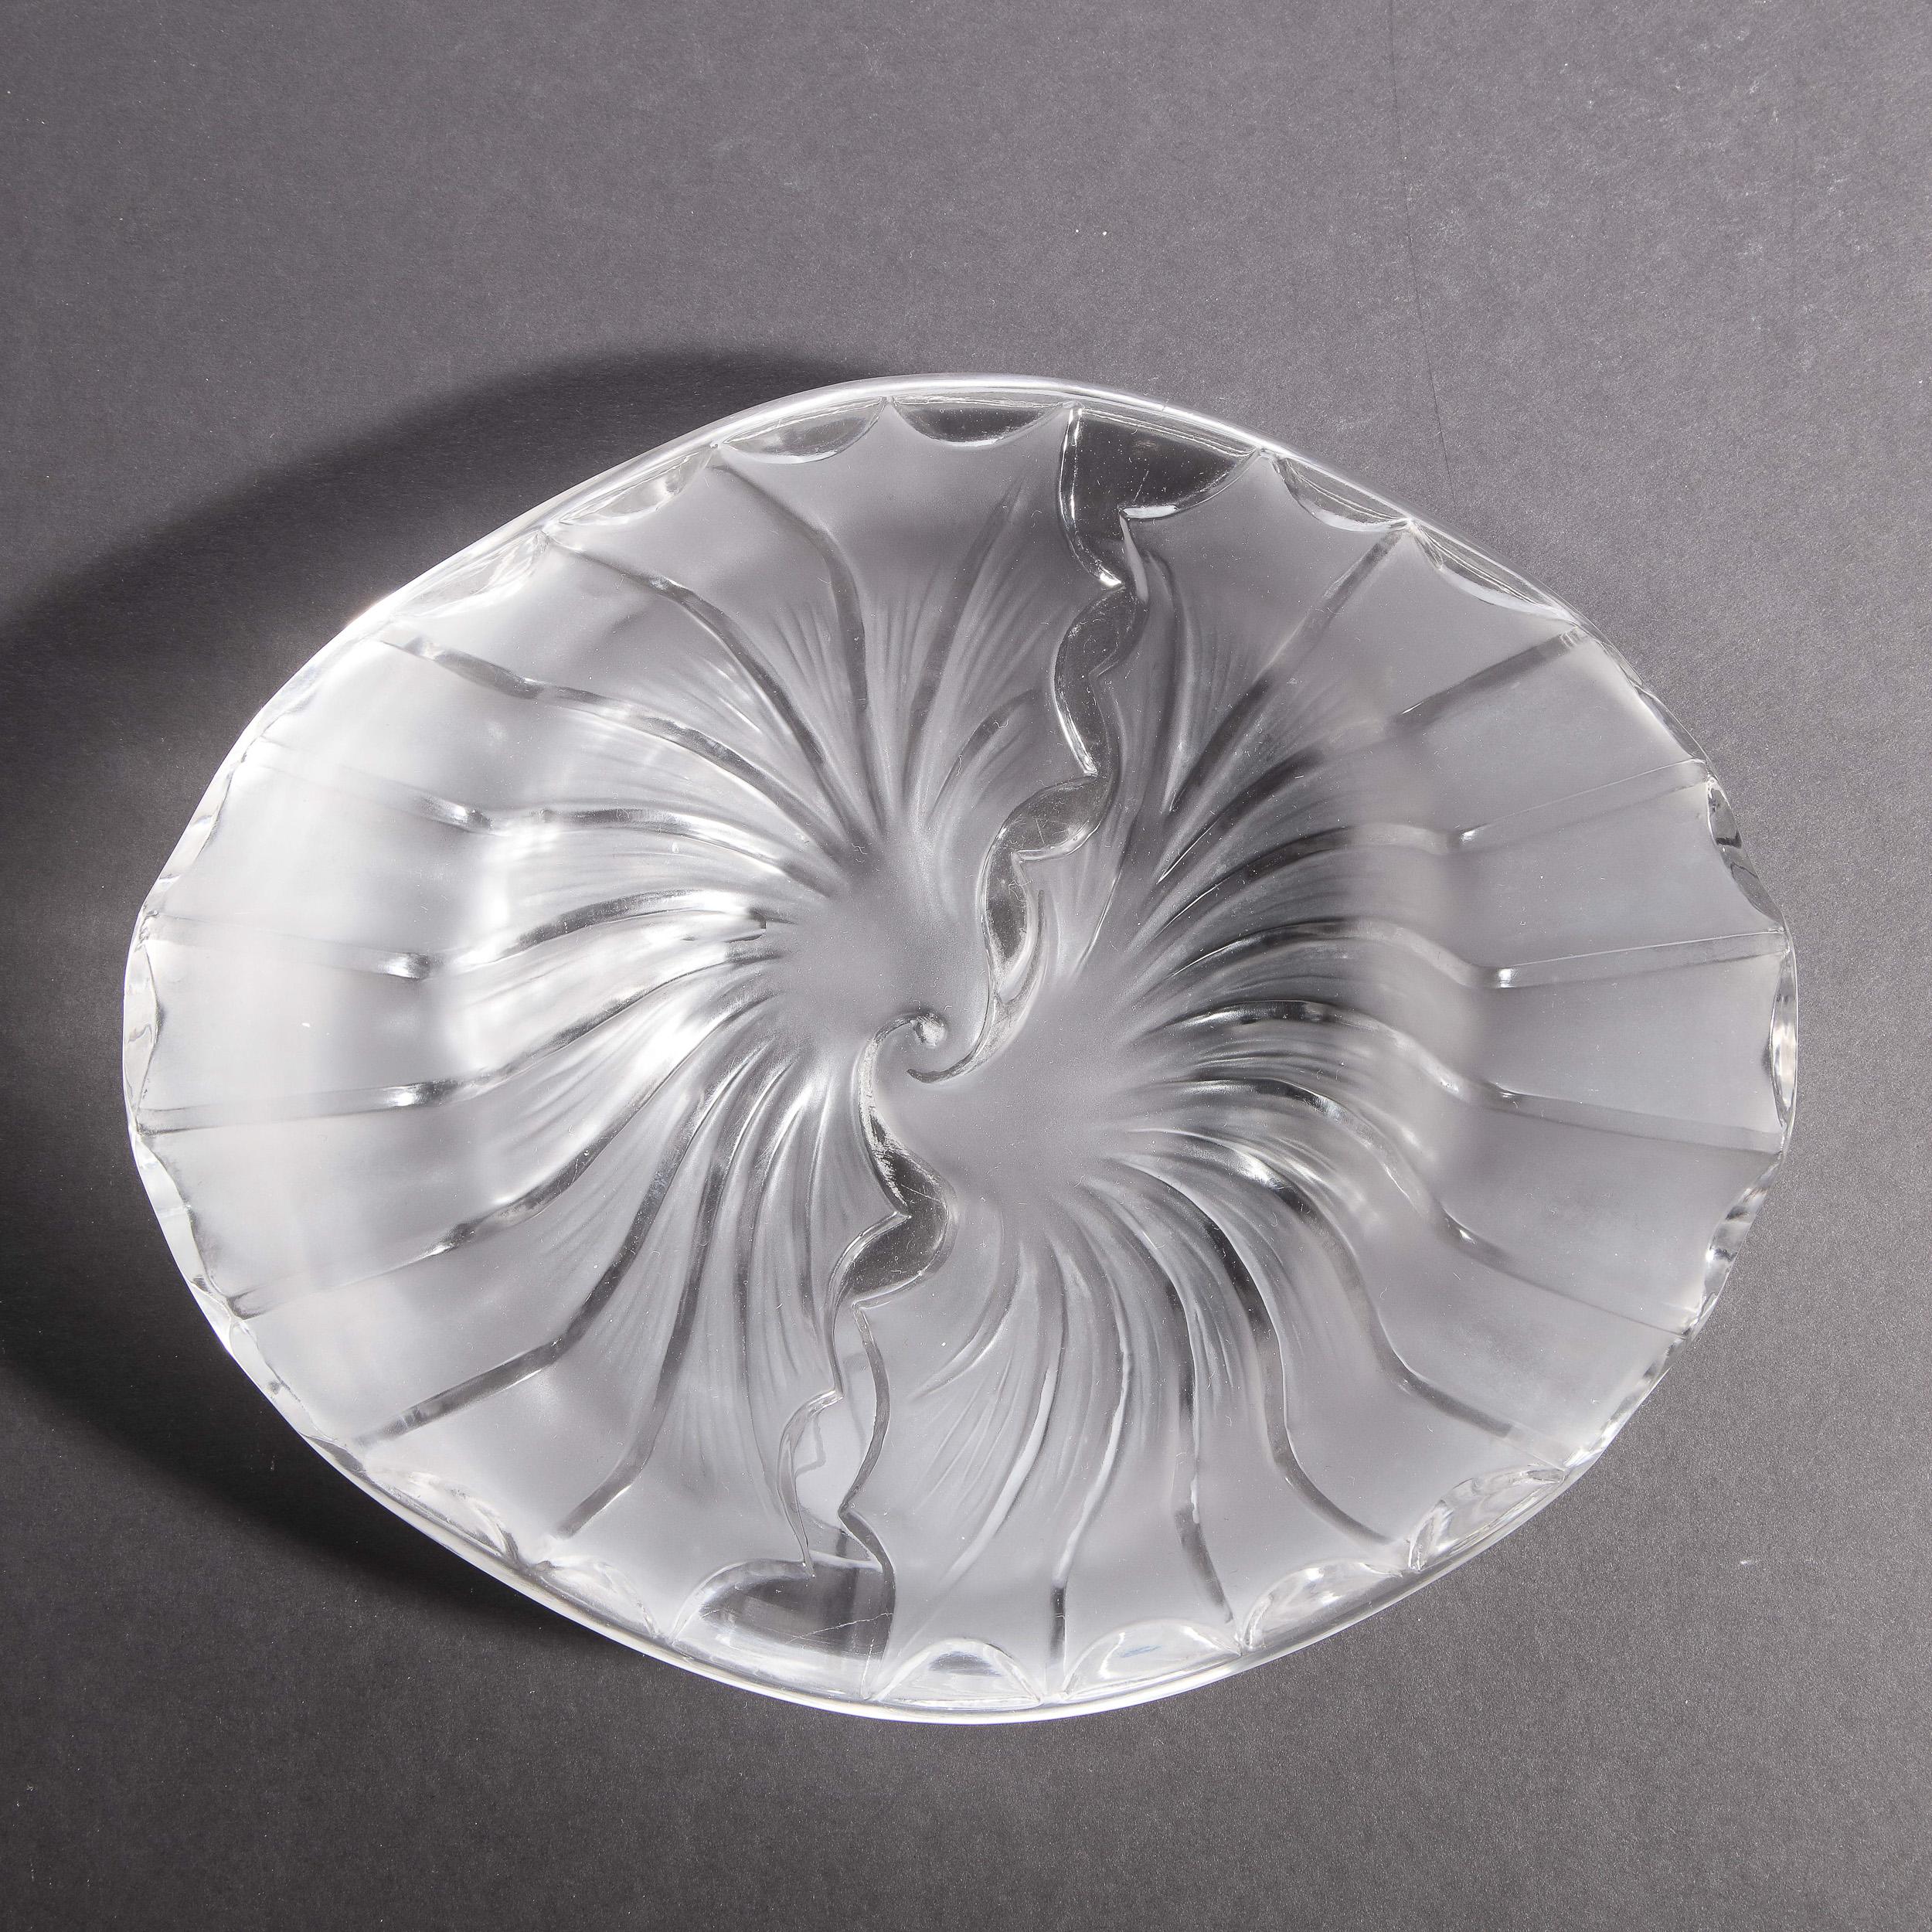 This elegant modernist decorative bowl was realized by Lalique- one of the world's most storied and celebrated makers of crystal and luxury goods since 1817 in France- during the latter half of the 20th Century. It offers a slightly convex form with